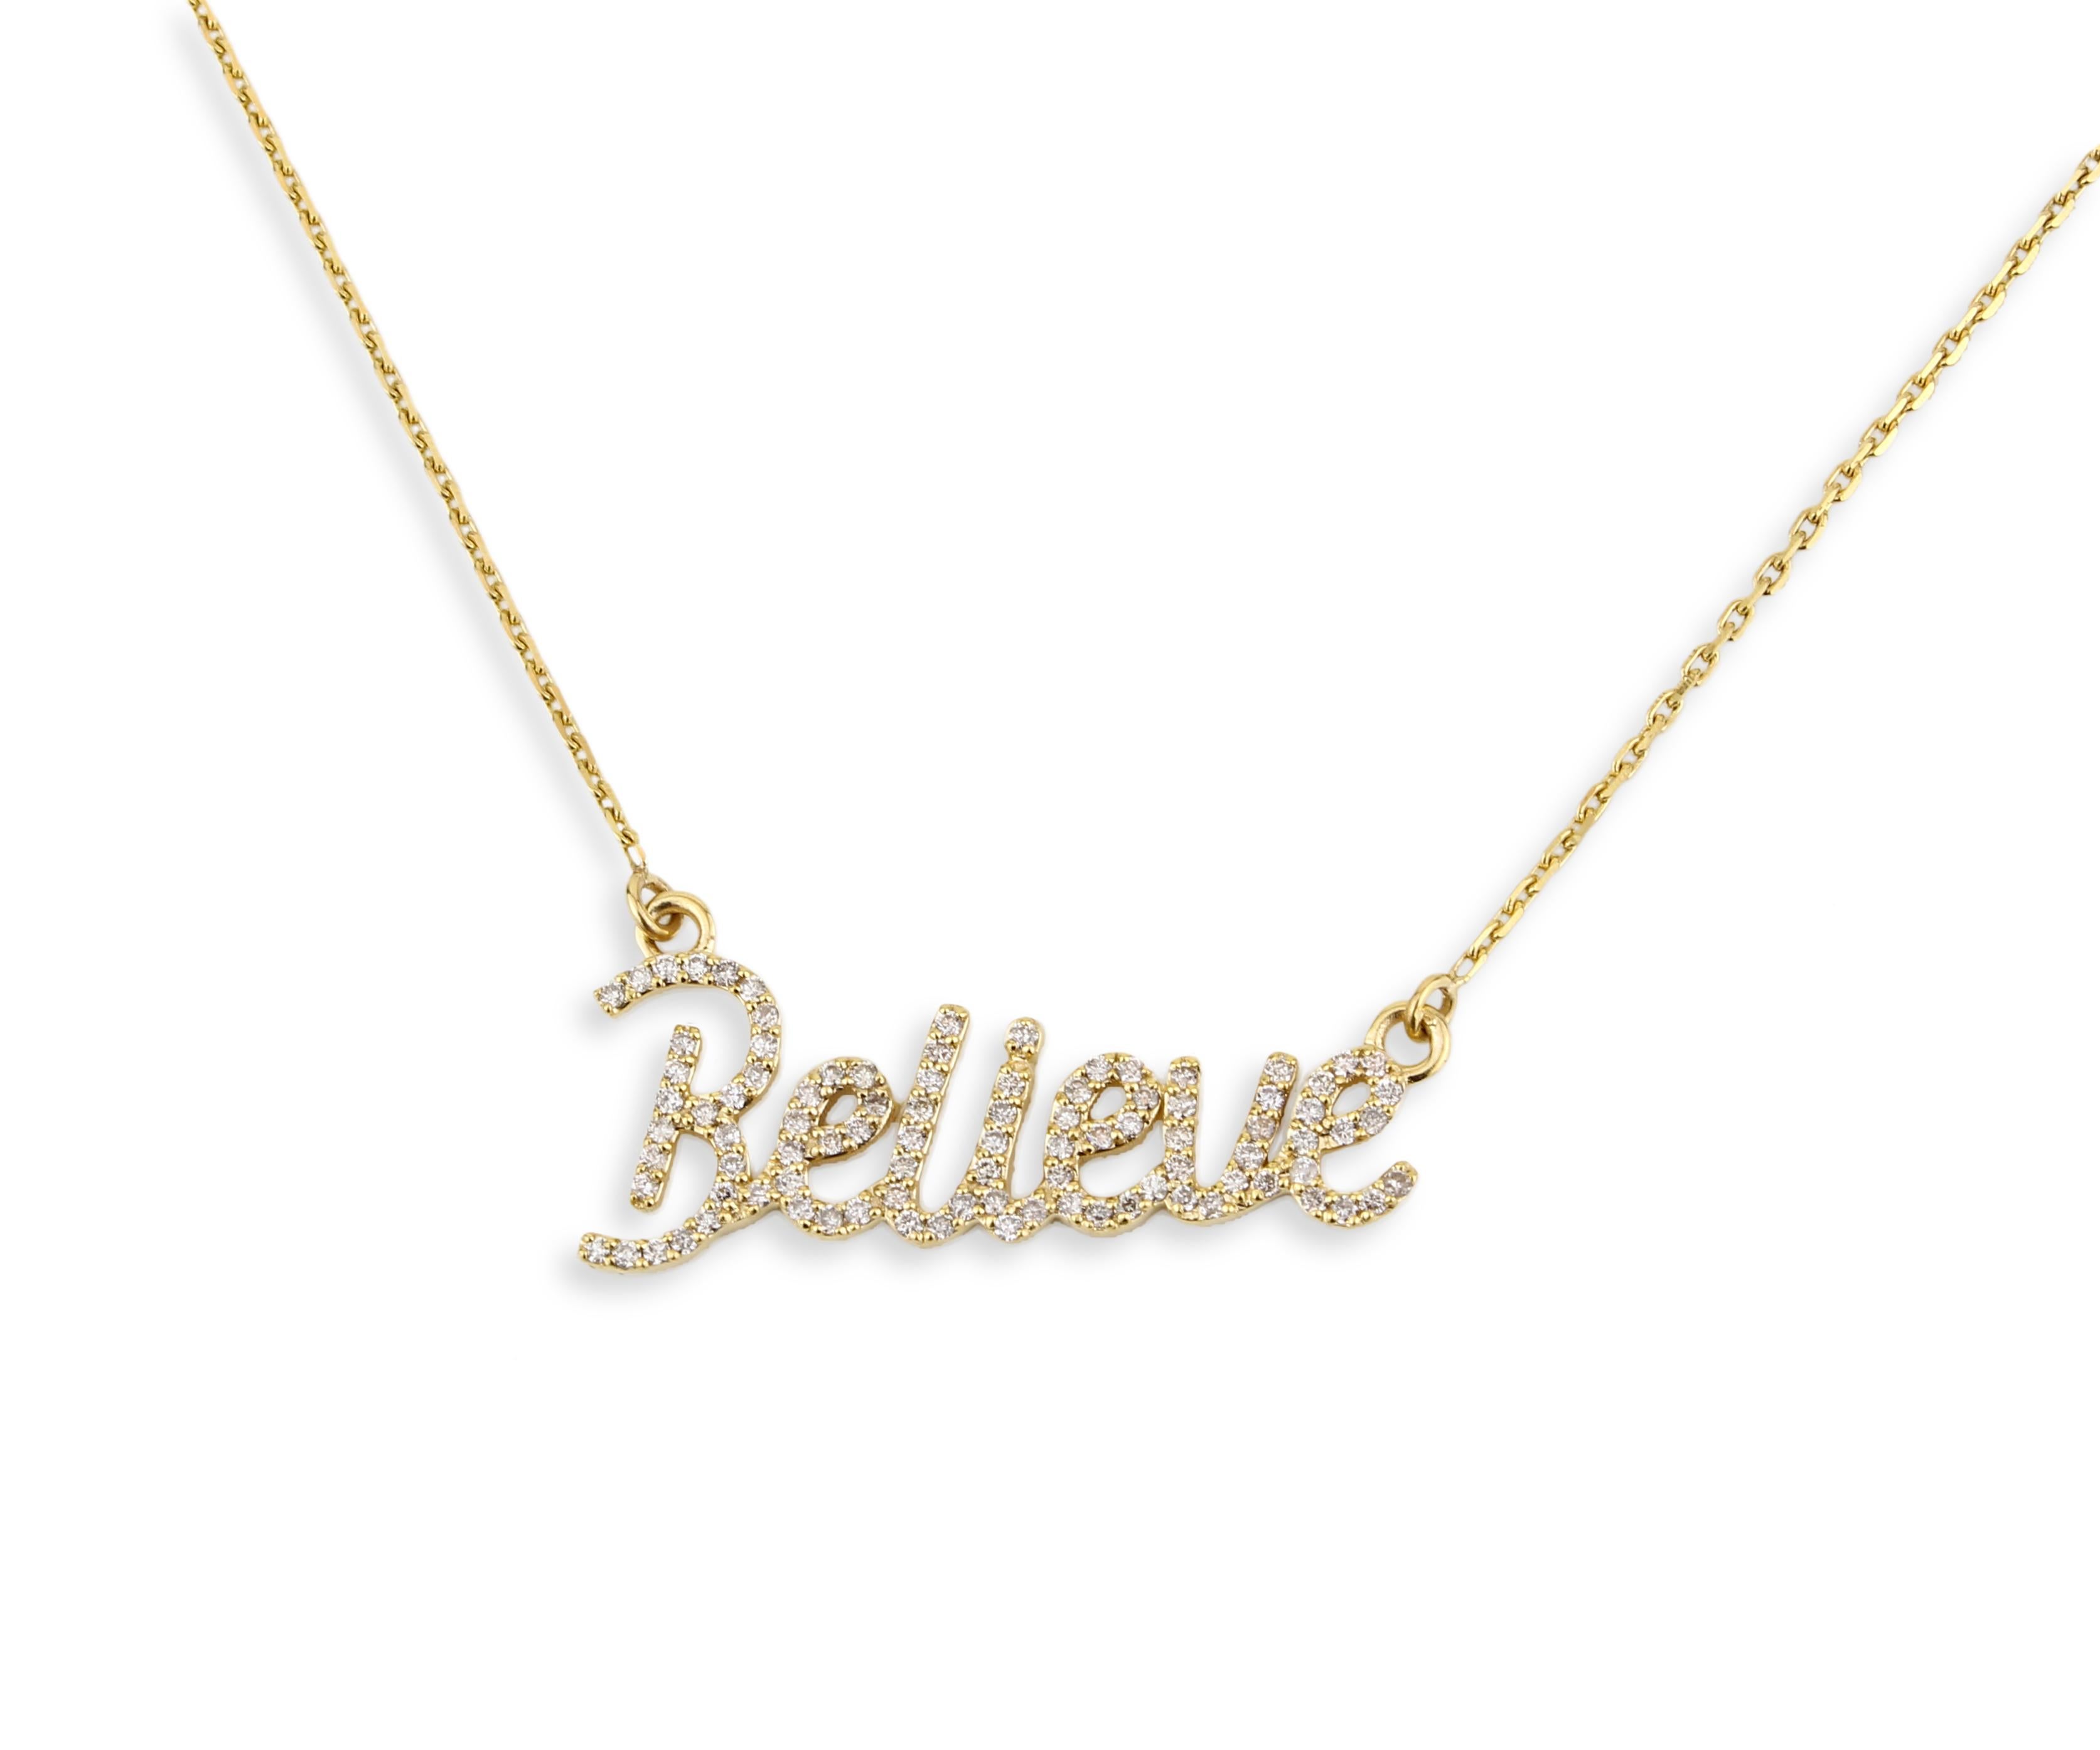 The Diamond Manifest Pendant Necklace is a sophisticated gold pendant necklace with the word 